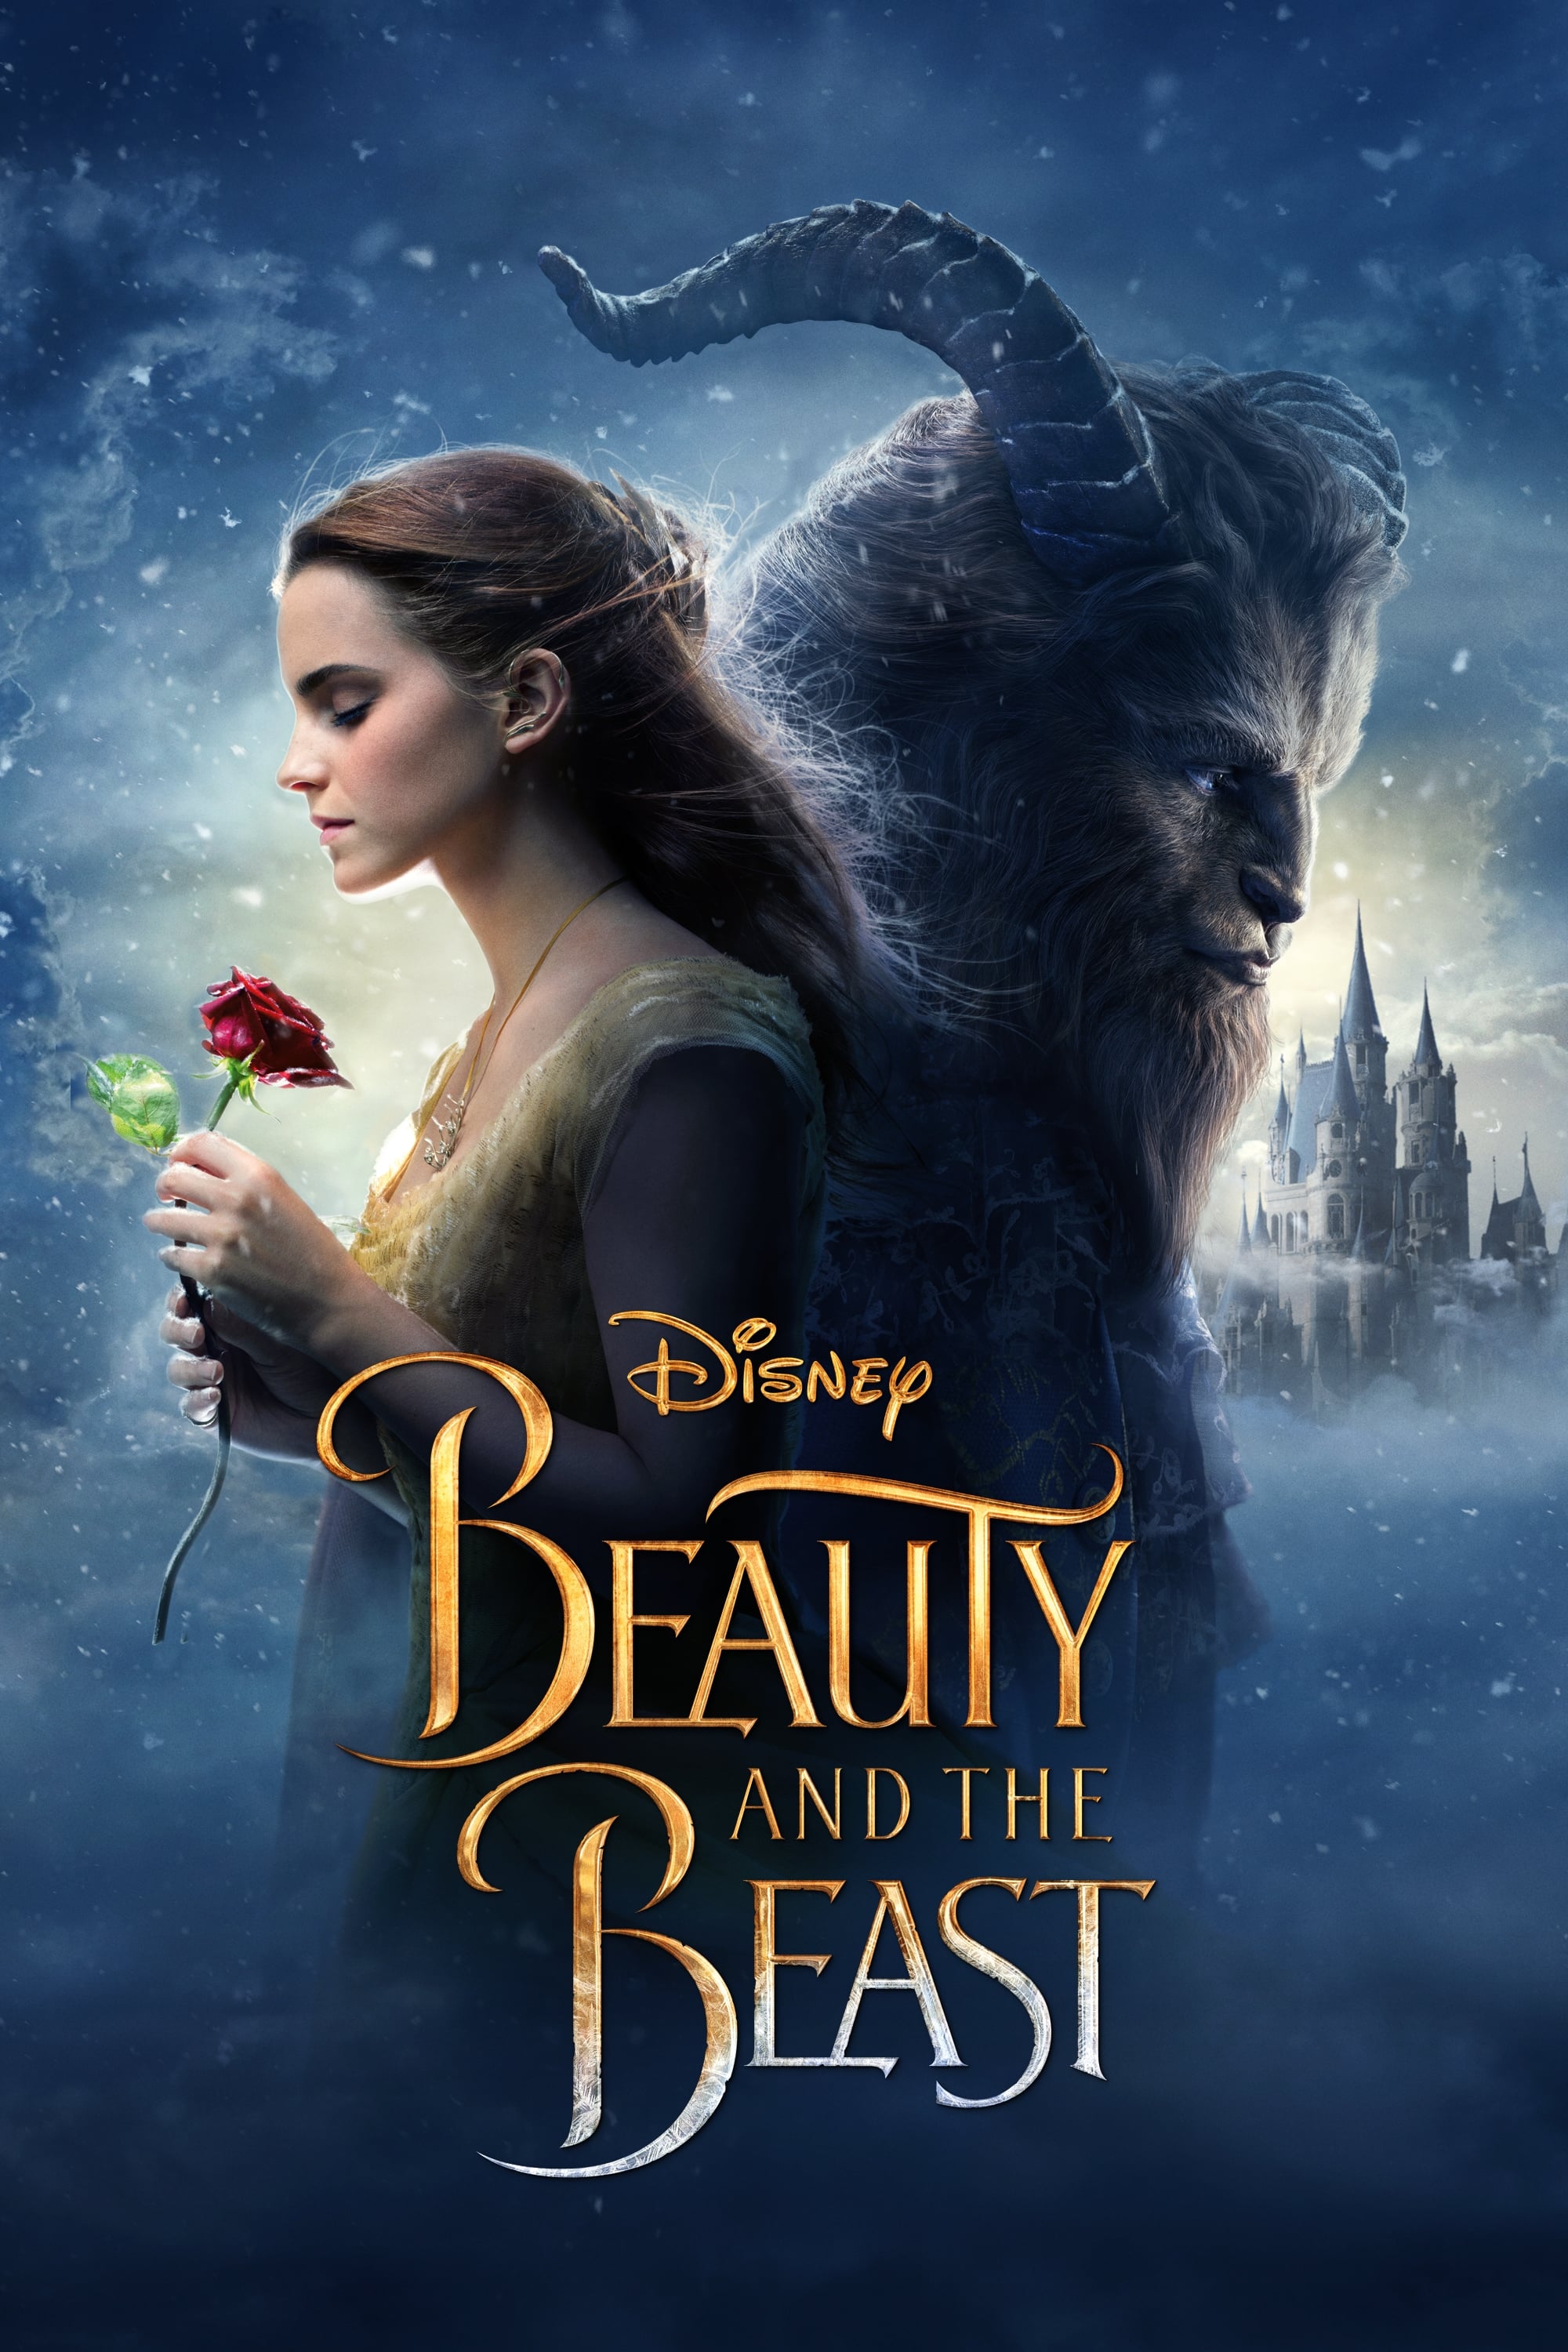 Filma Me Titra Shqip Beauty And The Beast 2017 Dvdshqip Com